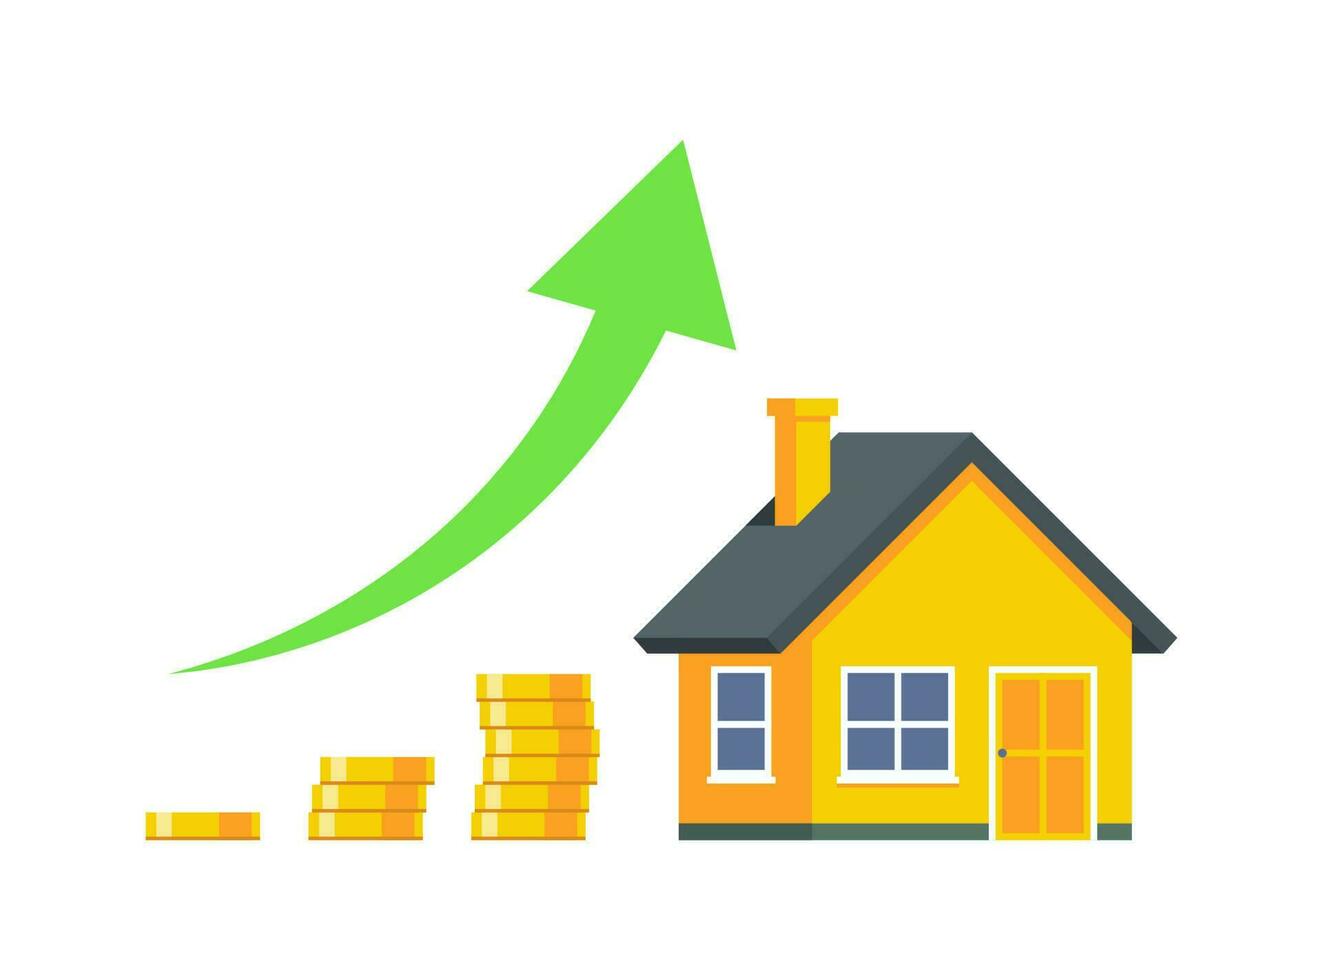 Housing price rising up vector